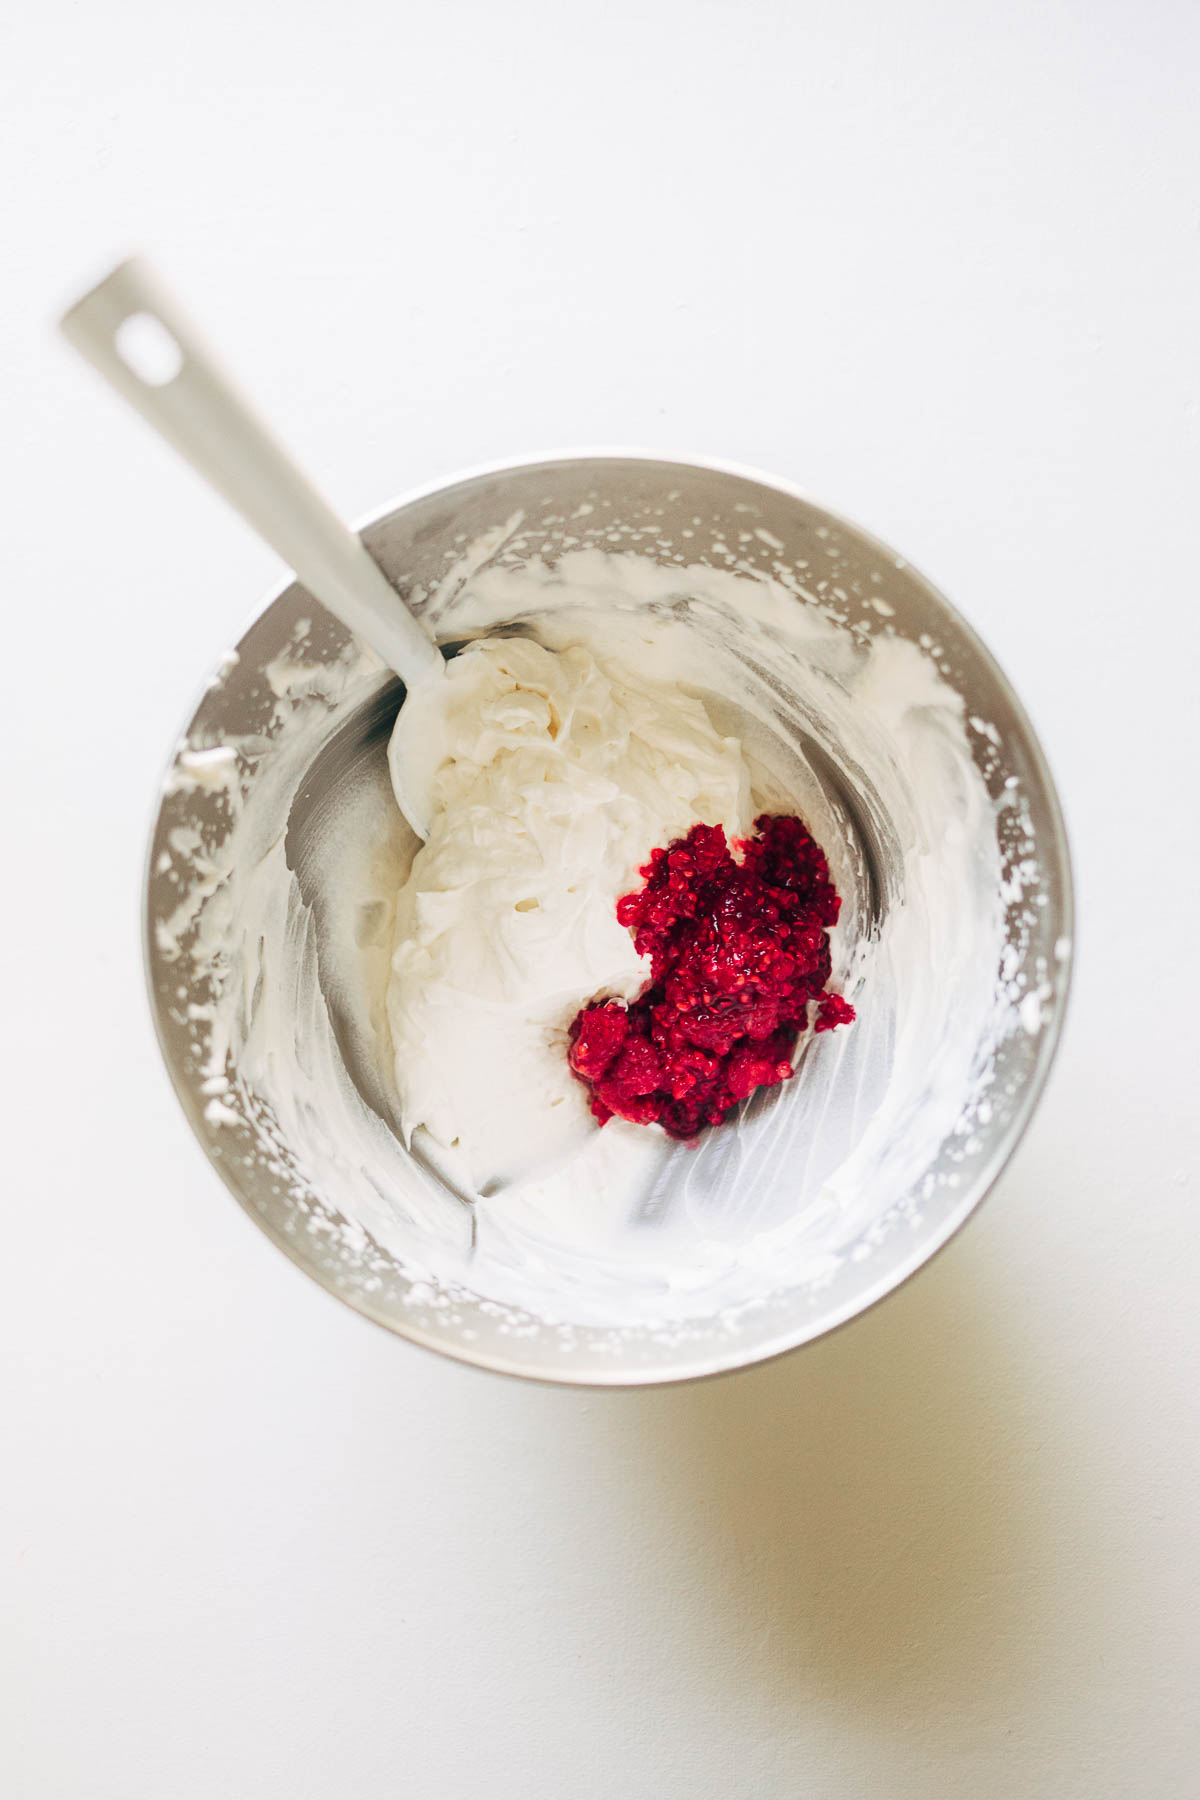 Mashed raspberries in a large bowl of whipped cream.